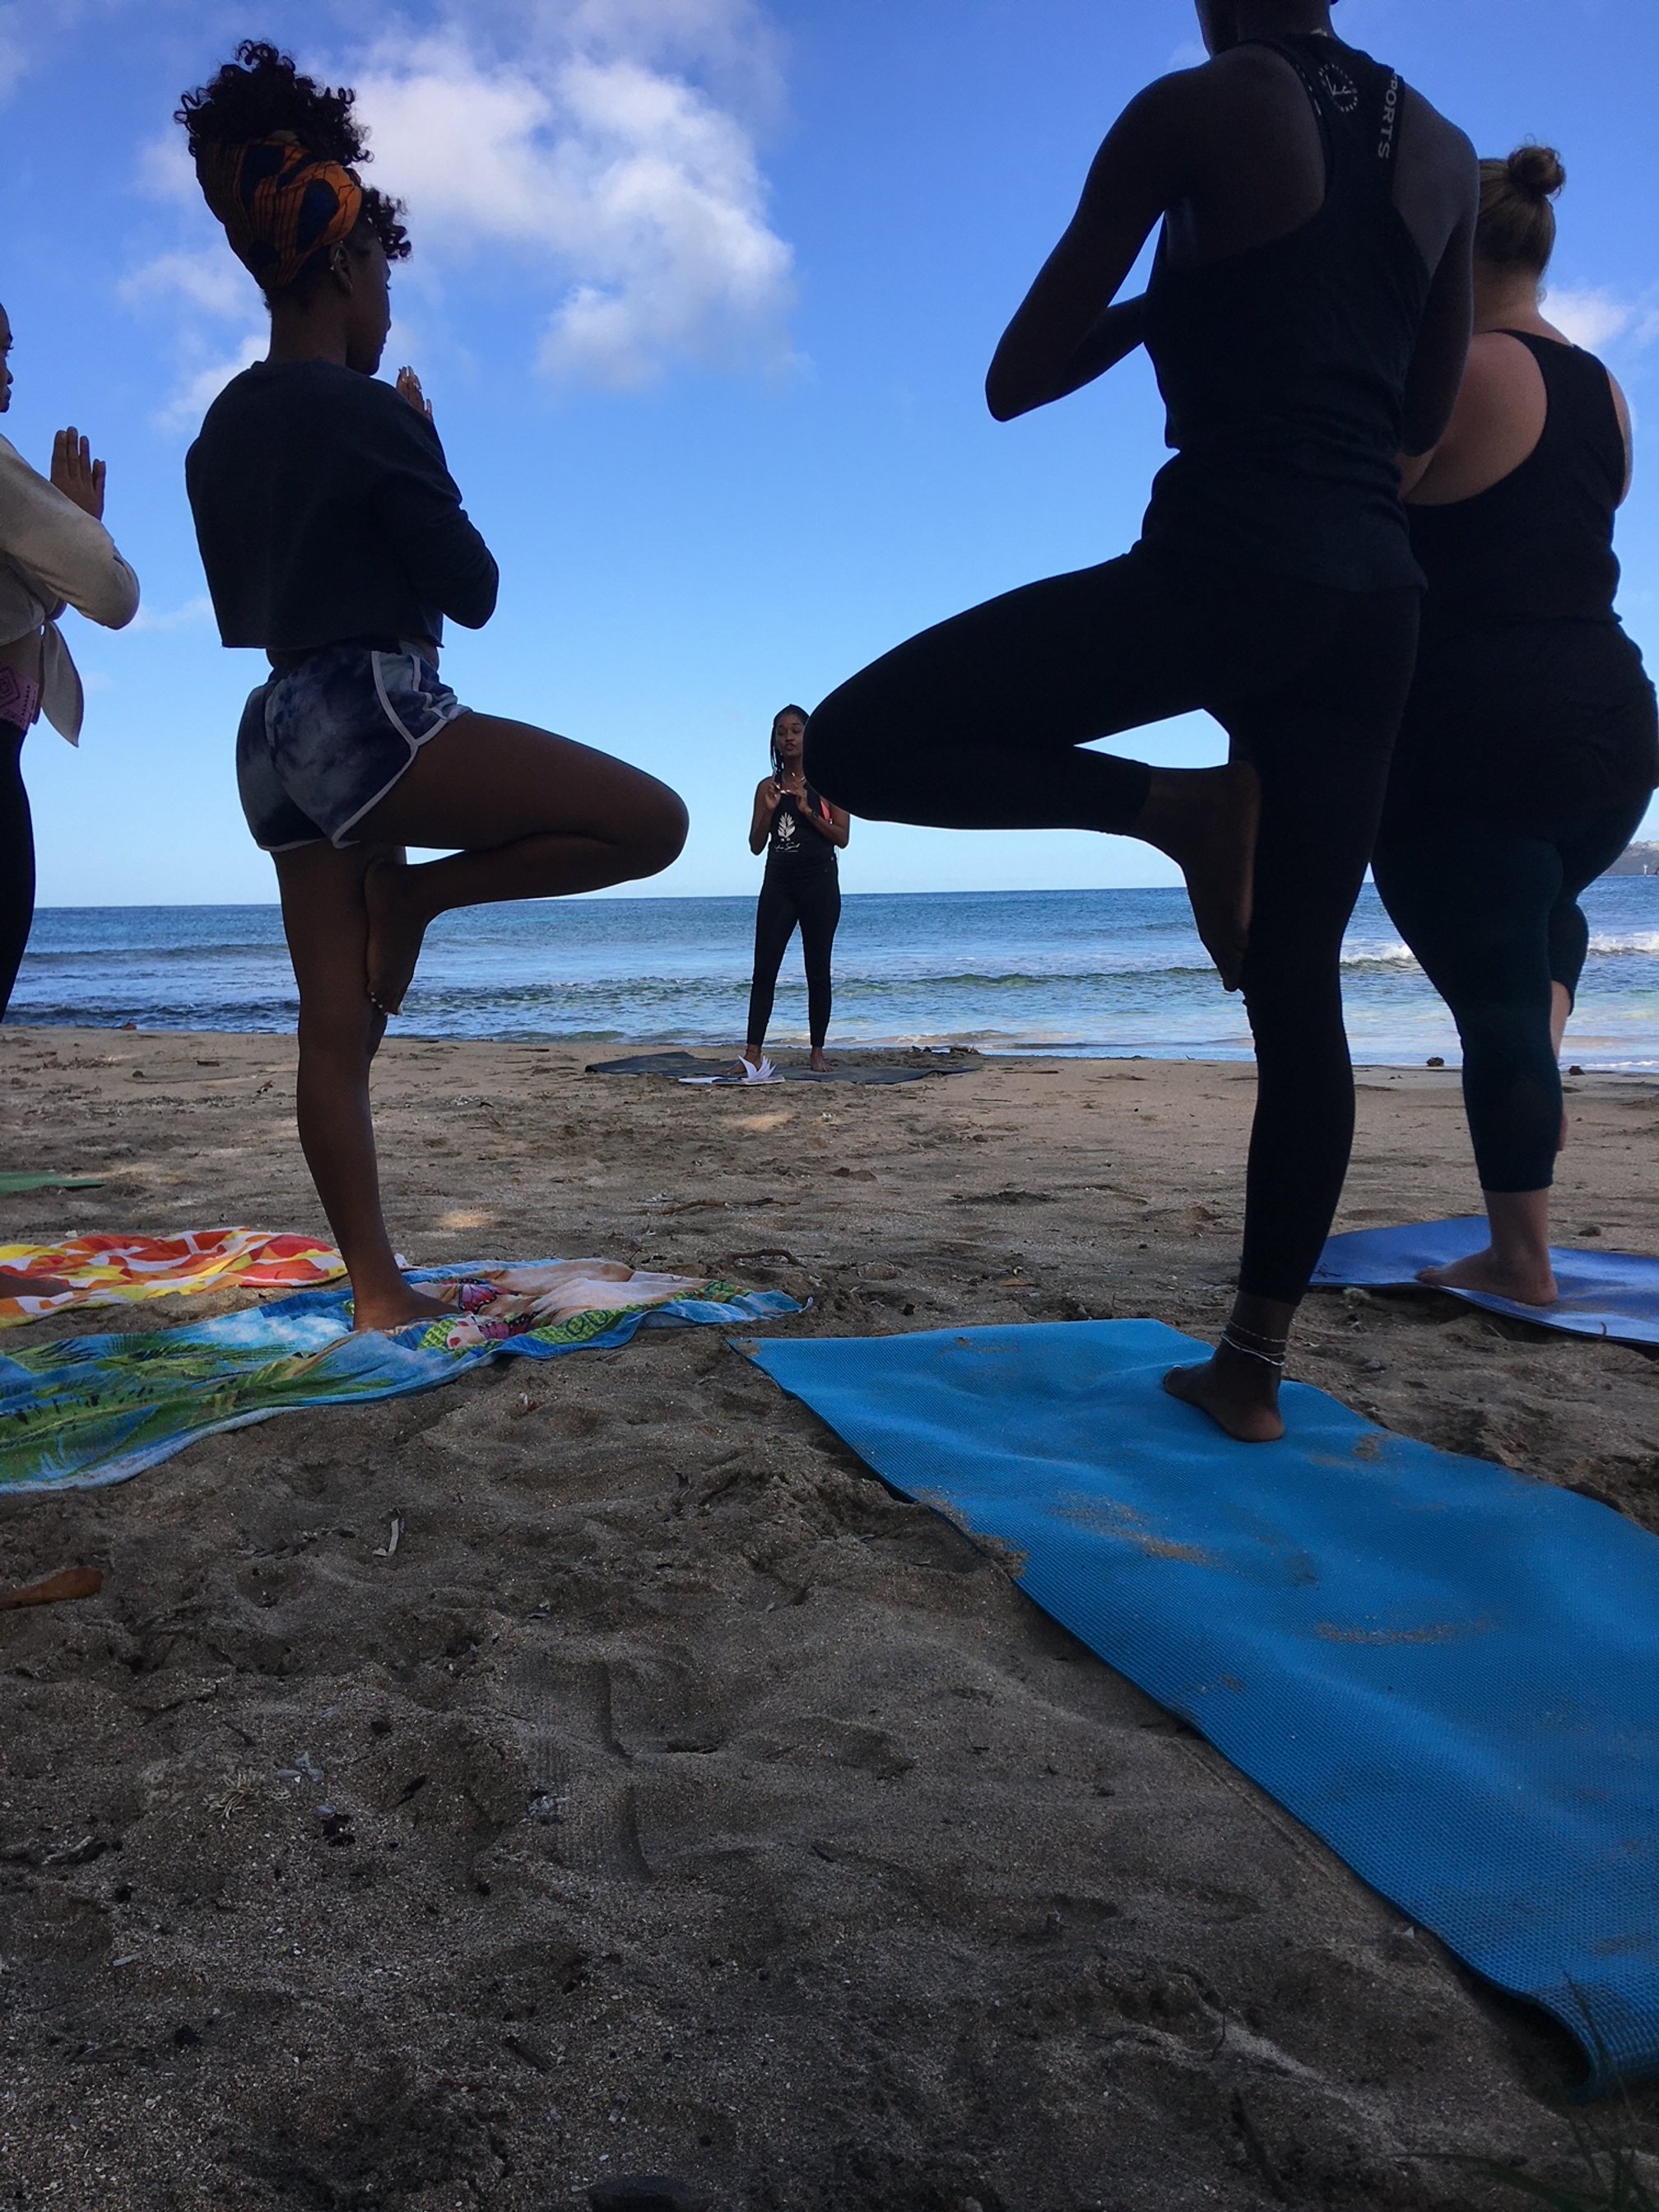 happy-brown-girl-on-the-beach-soka-gyal-march-14-2020-women-yoga-in-st-vincent-and-the-grenadines.JPG